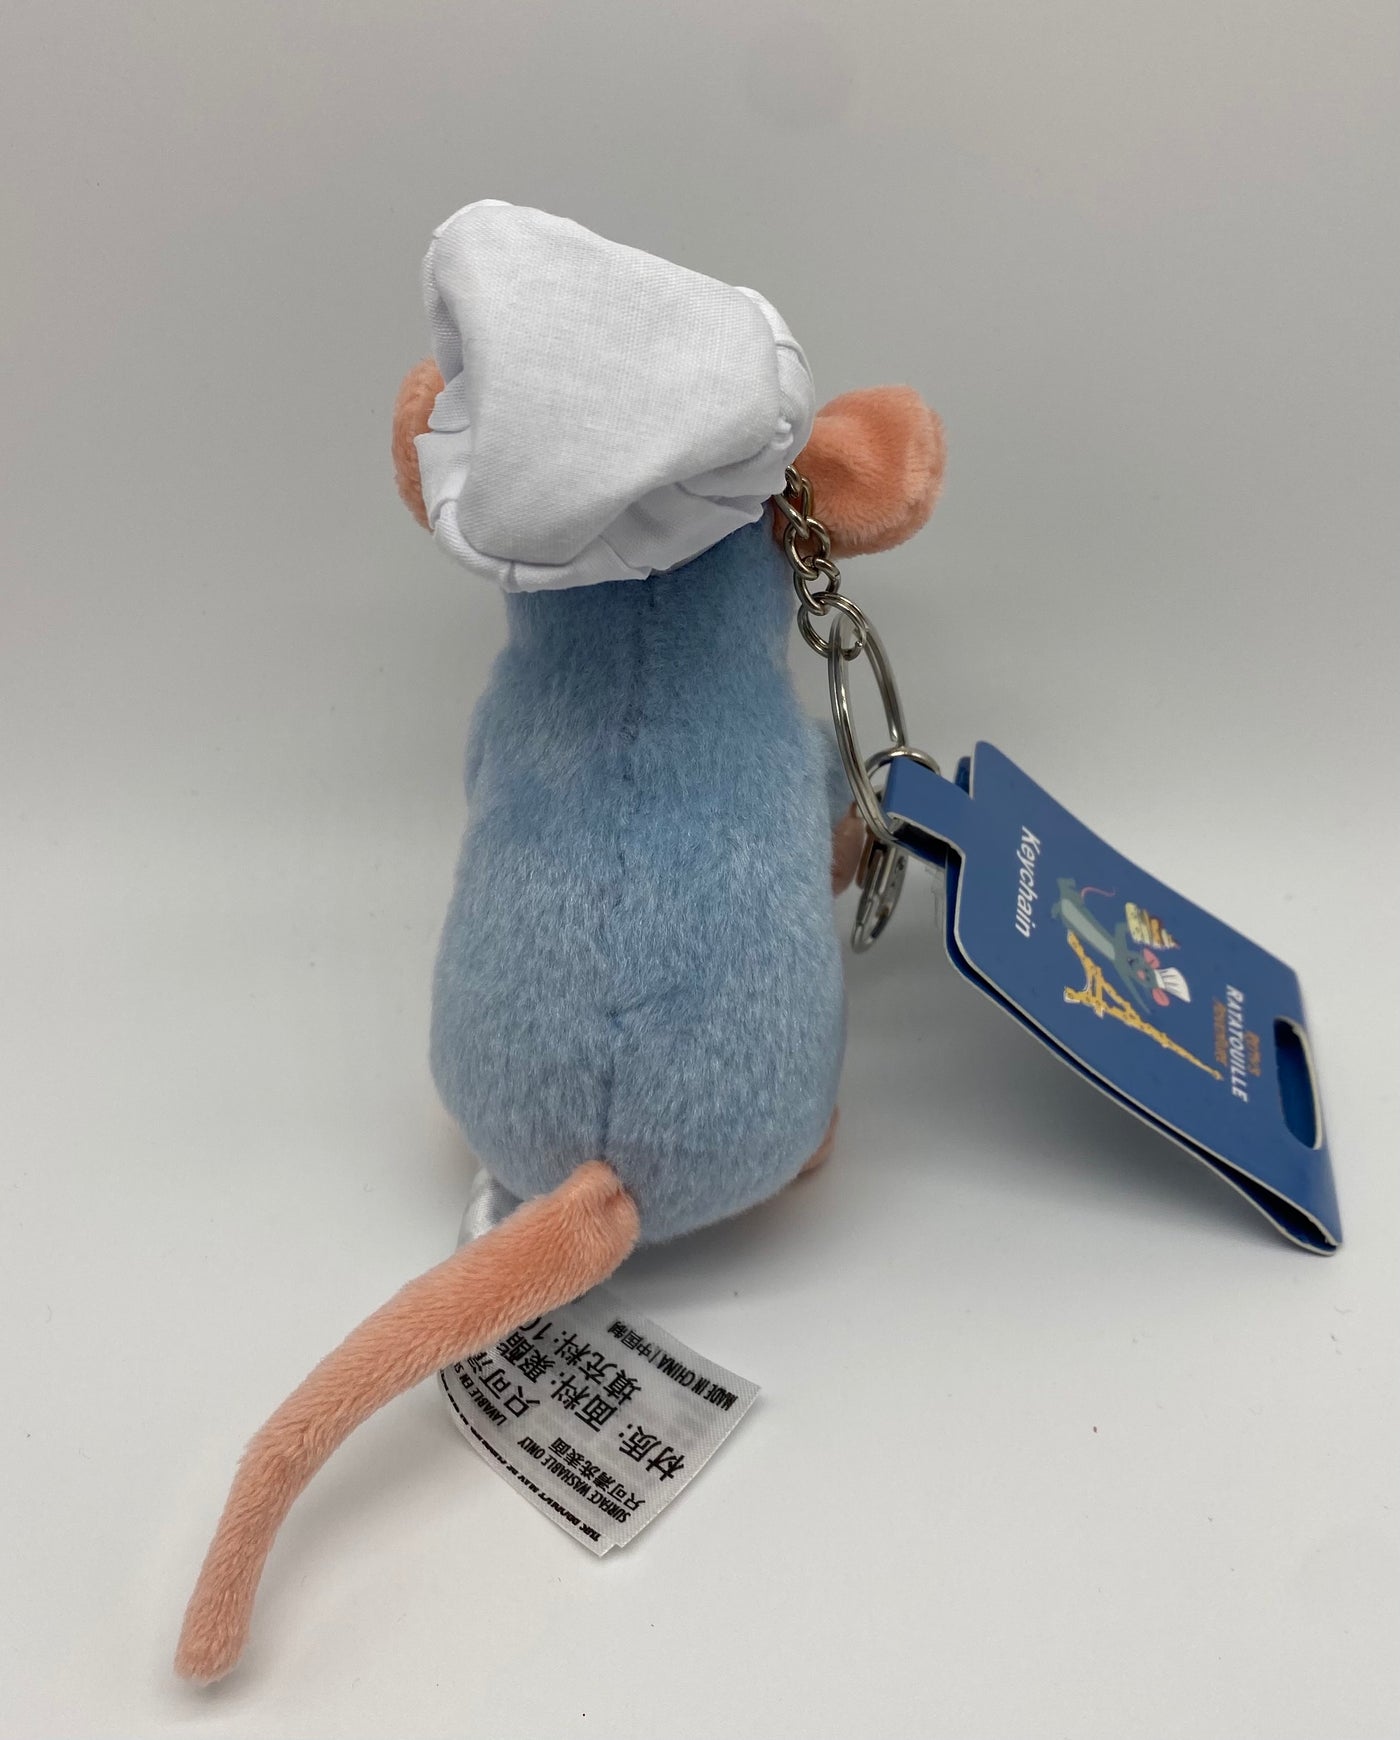 Disney Parks Chef Remy's Ratatouille Adventure Plush Keychain New with Tag